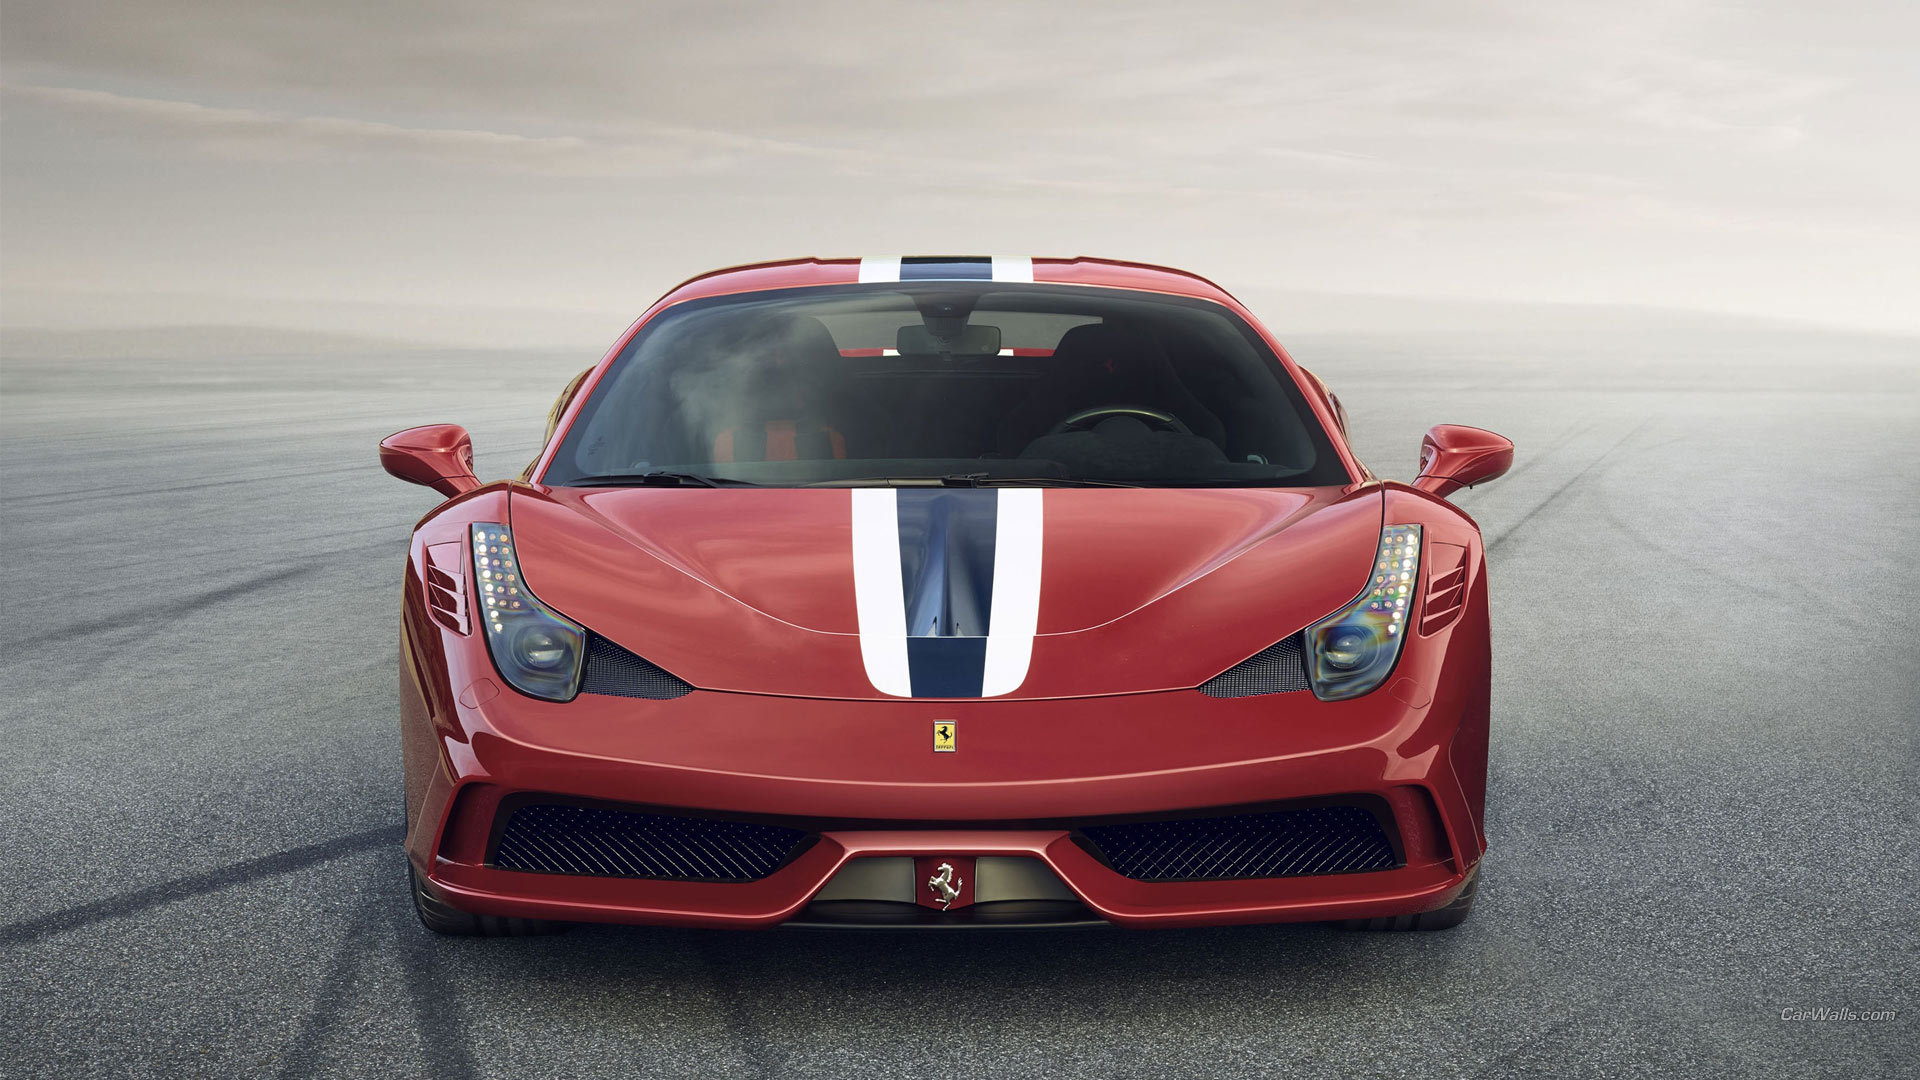 Awesome Ferrari 458 Speciale free wallpaper ID:218882 for full hd 1080p desktop